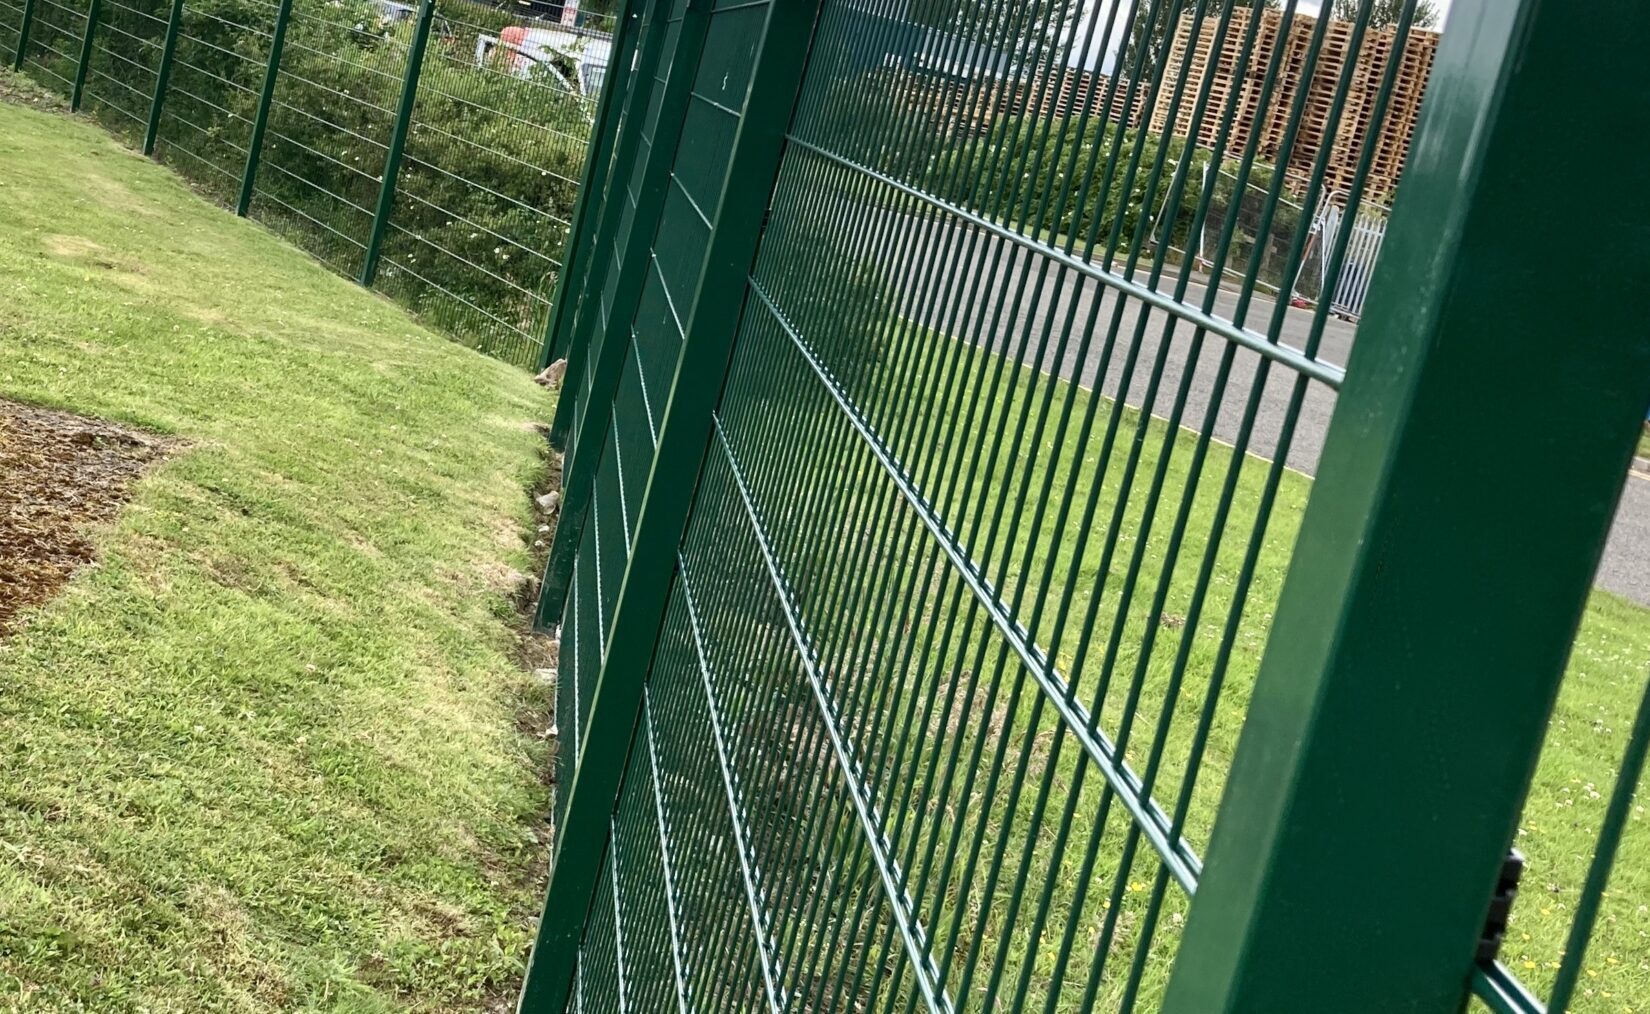 AES (SCOTLAND) LTD recently installed 200m of mesh security fencing and 125m of chain link fencing in Bathgate